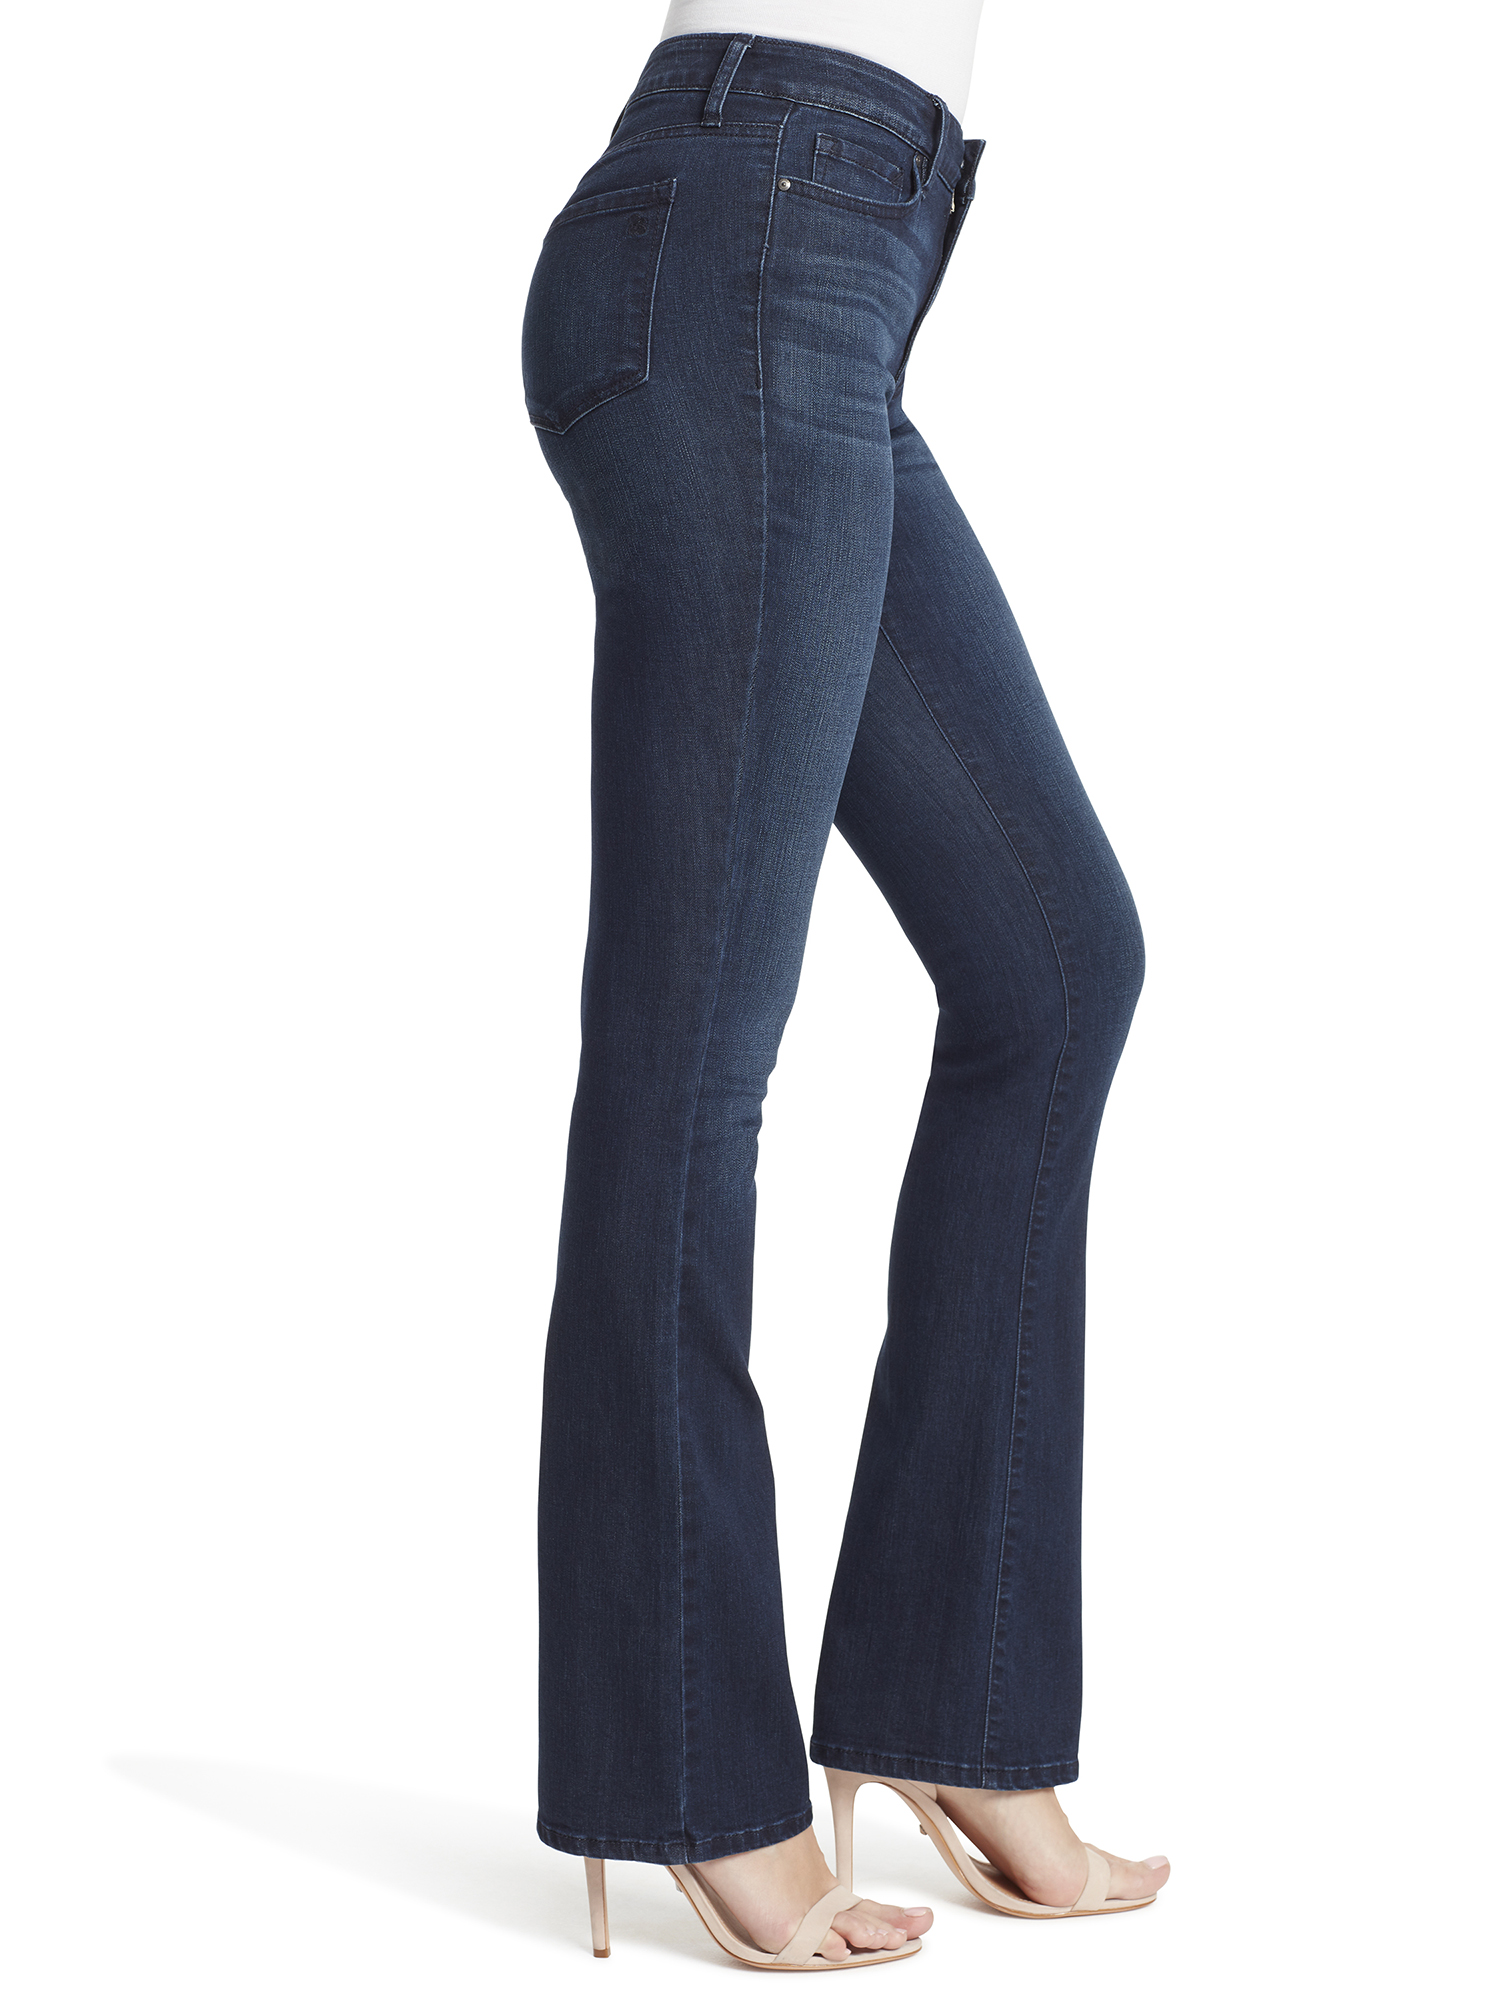 Jessica Simpson Women's Truly Yours Bootcut Jean - image 4 of 4